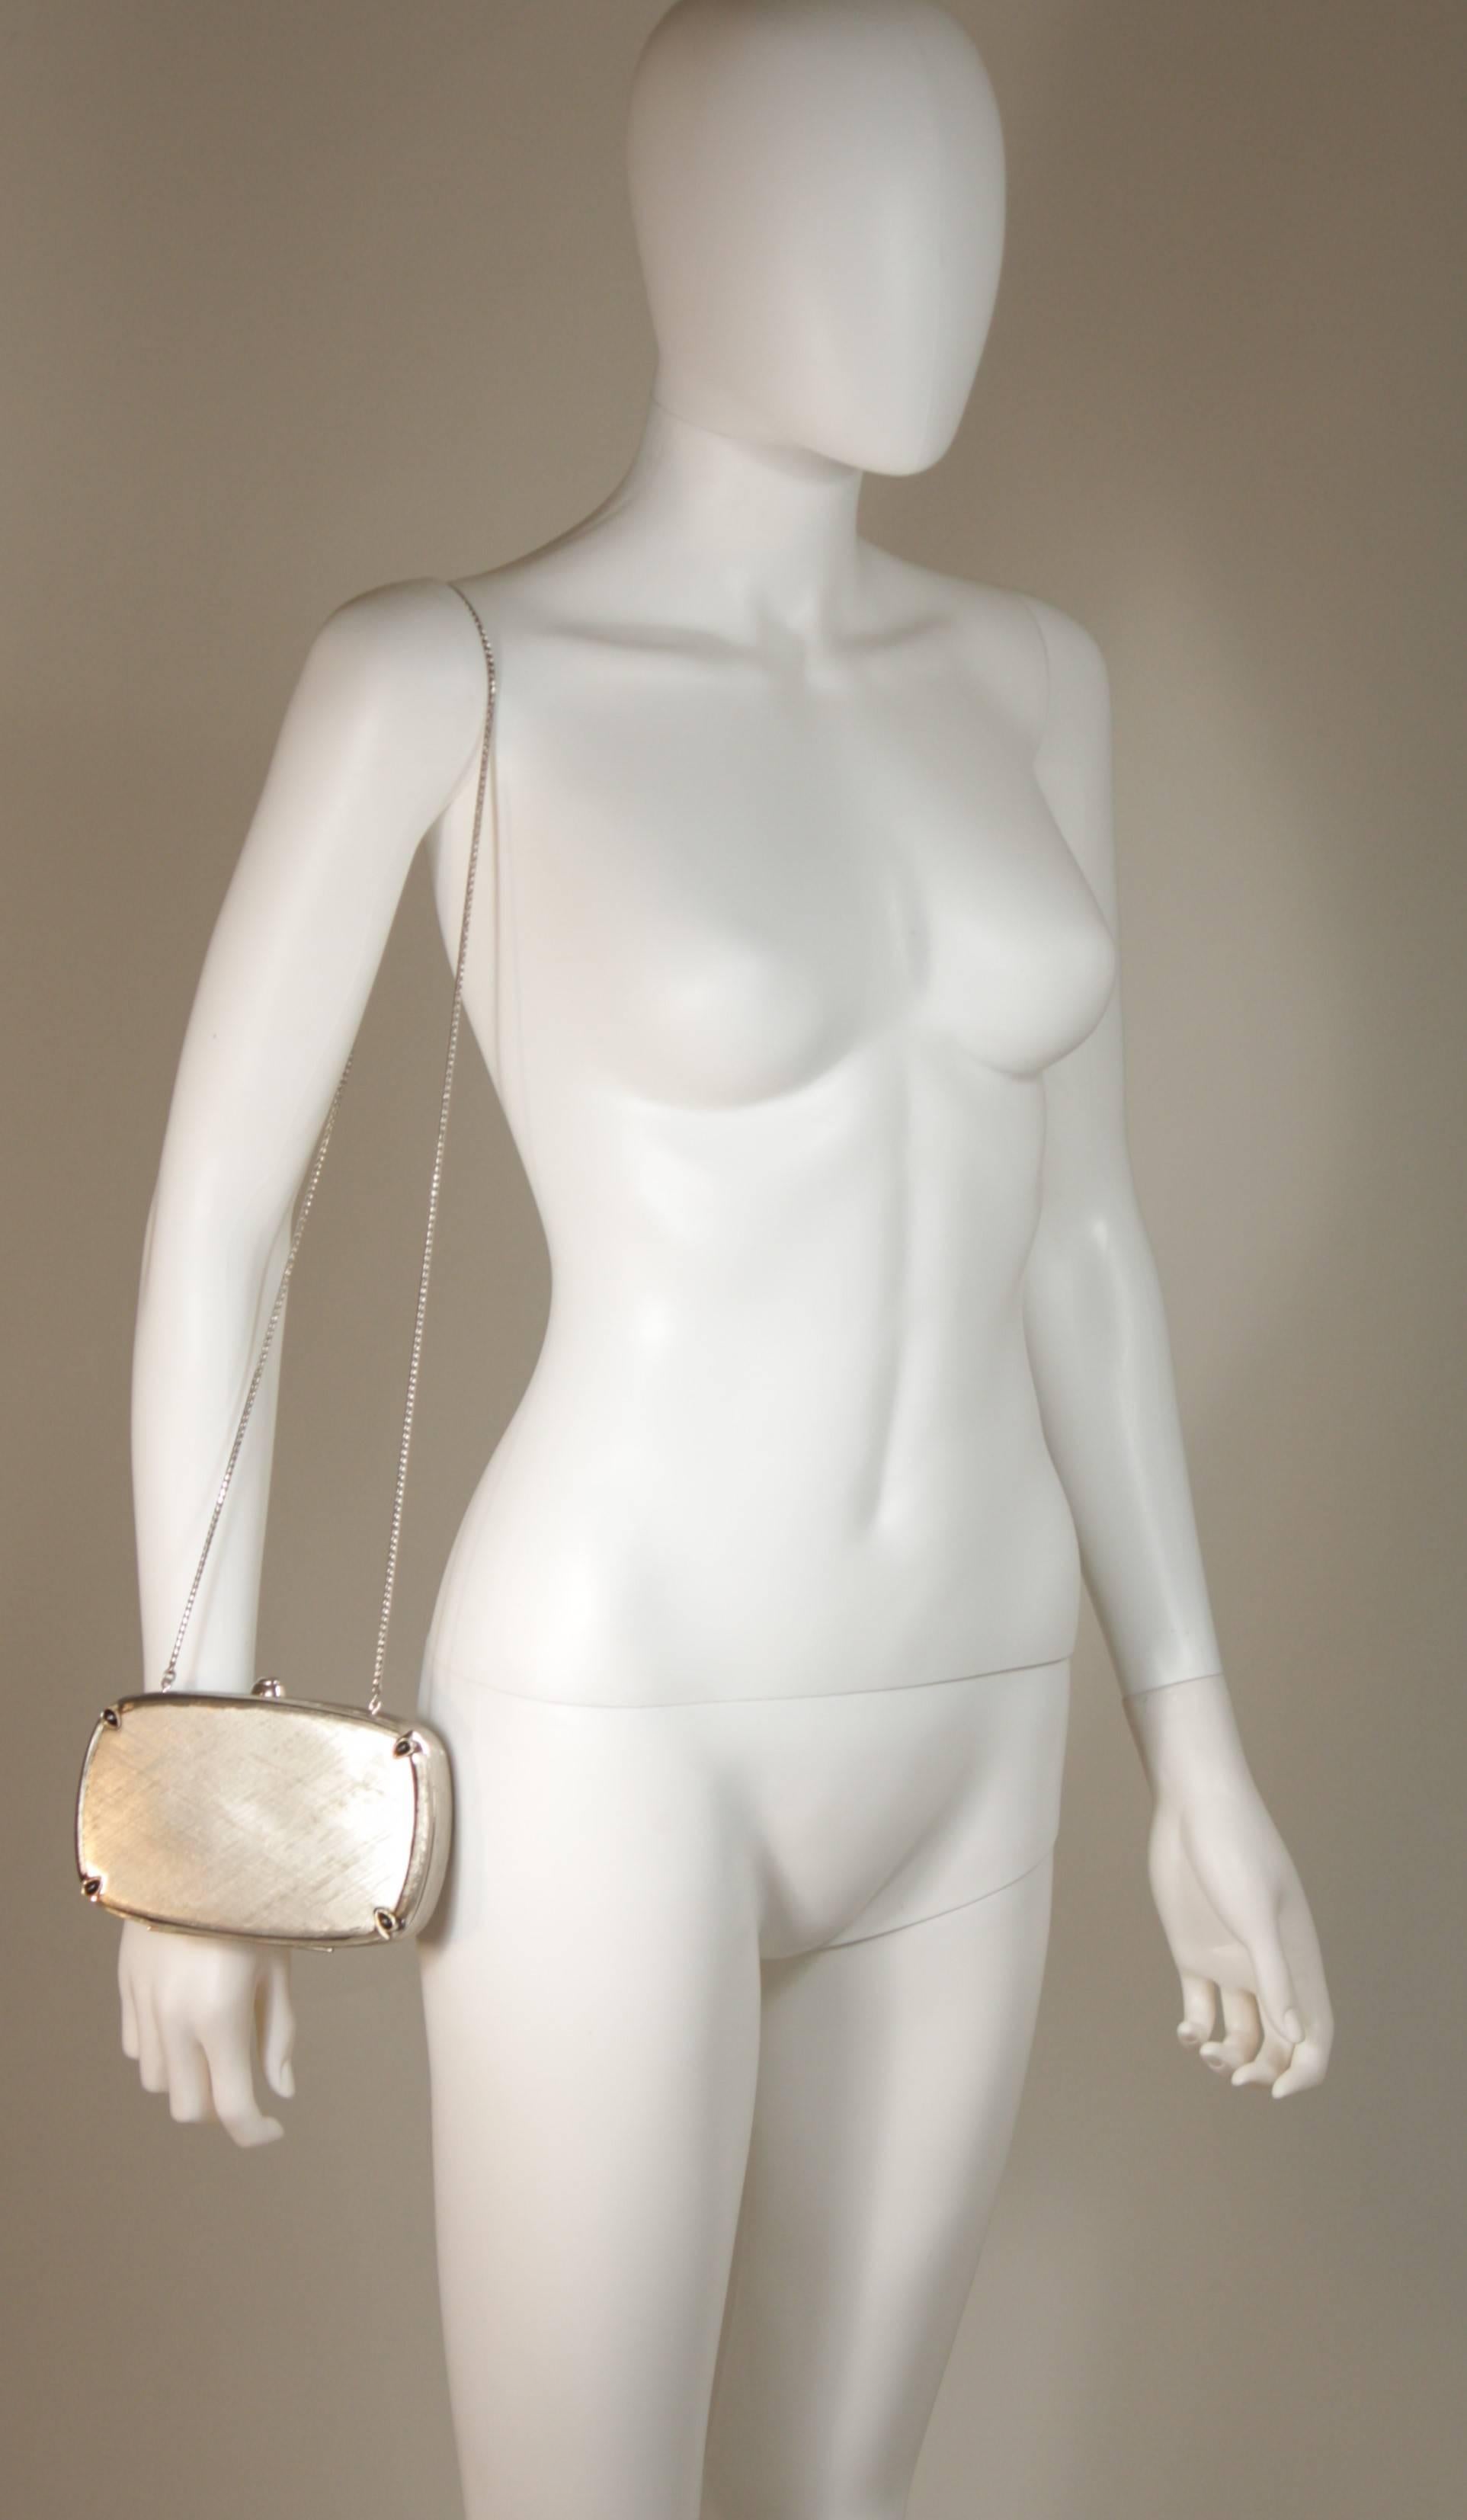  JUDITH LEIBER Brushed Metal Evening Purse with Stone Details Optional Strap In Excellent Condition For Sale In Los Angeles, CA